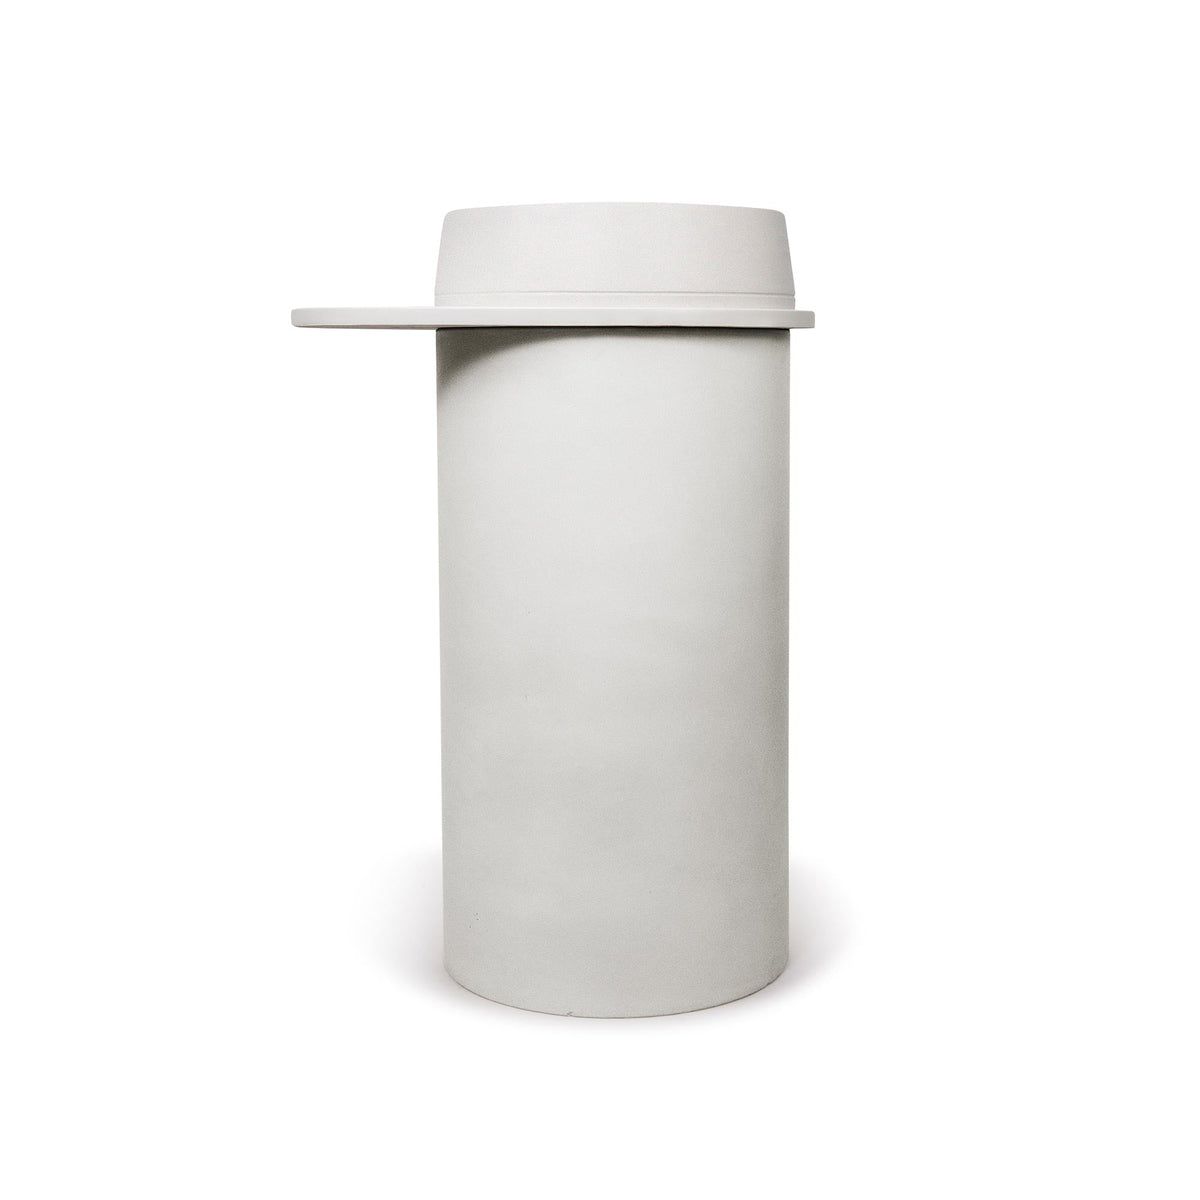 Cylinder with Tray - Funl Basin (Charcoal,Sand)